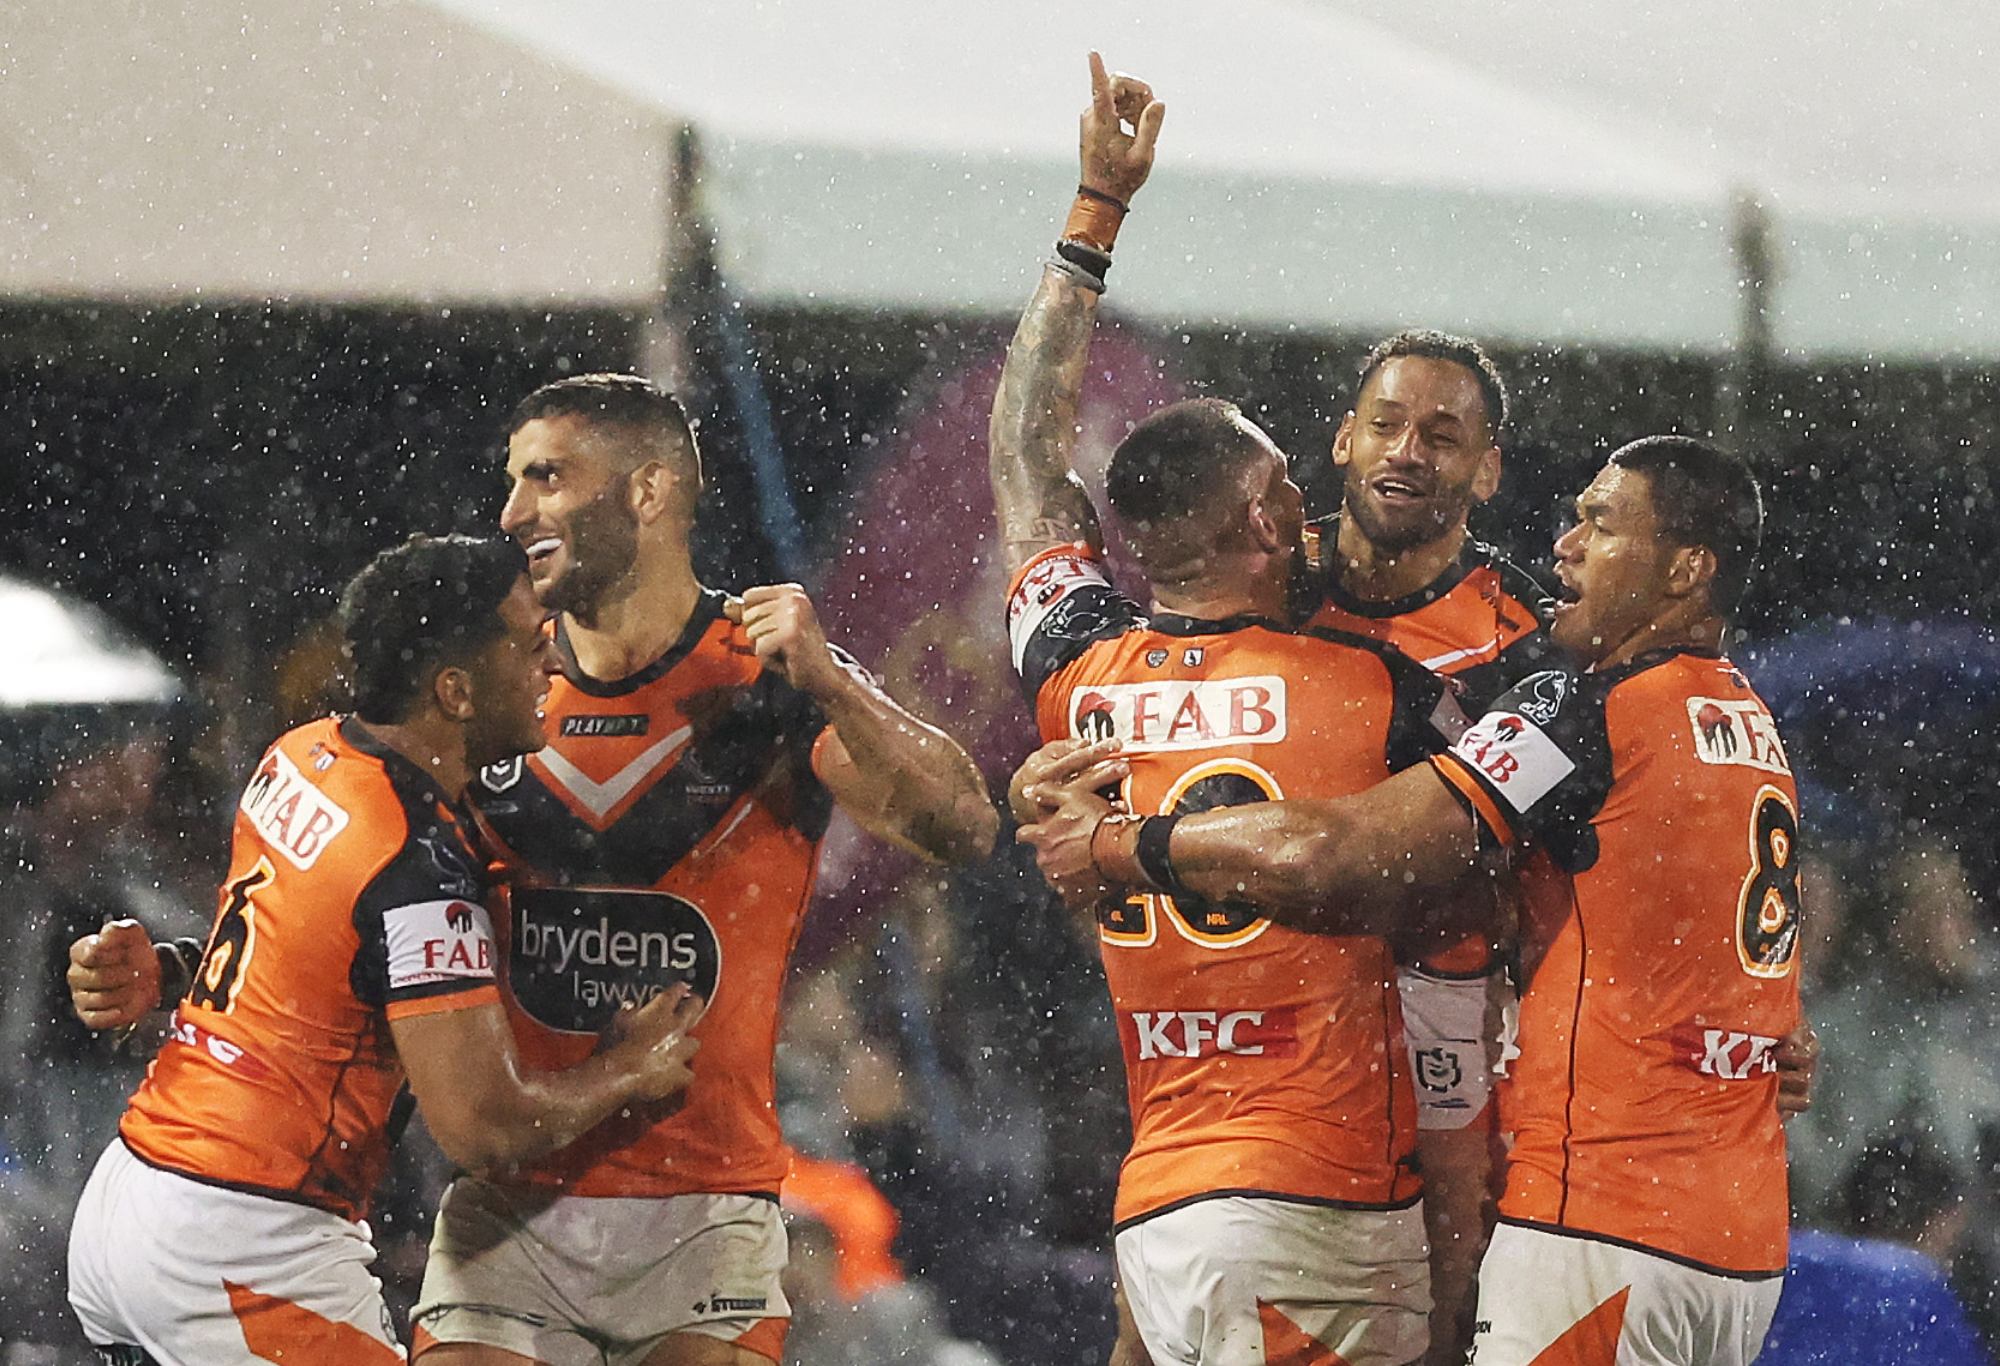 BATHURST, AUSTRALIA - APRIL 29: Wests Tigers players celebrate victory on the final whistle during the round nine NRL match between Penrith Panthers and Wests Tigers at Carrington Park on April 29, 2023 in Bathurst, Australia. (Photo by Mark Metcalfe/Getty Images)